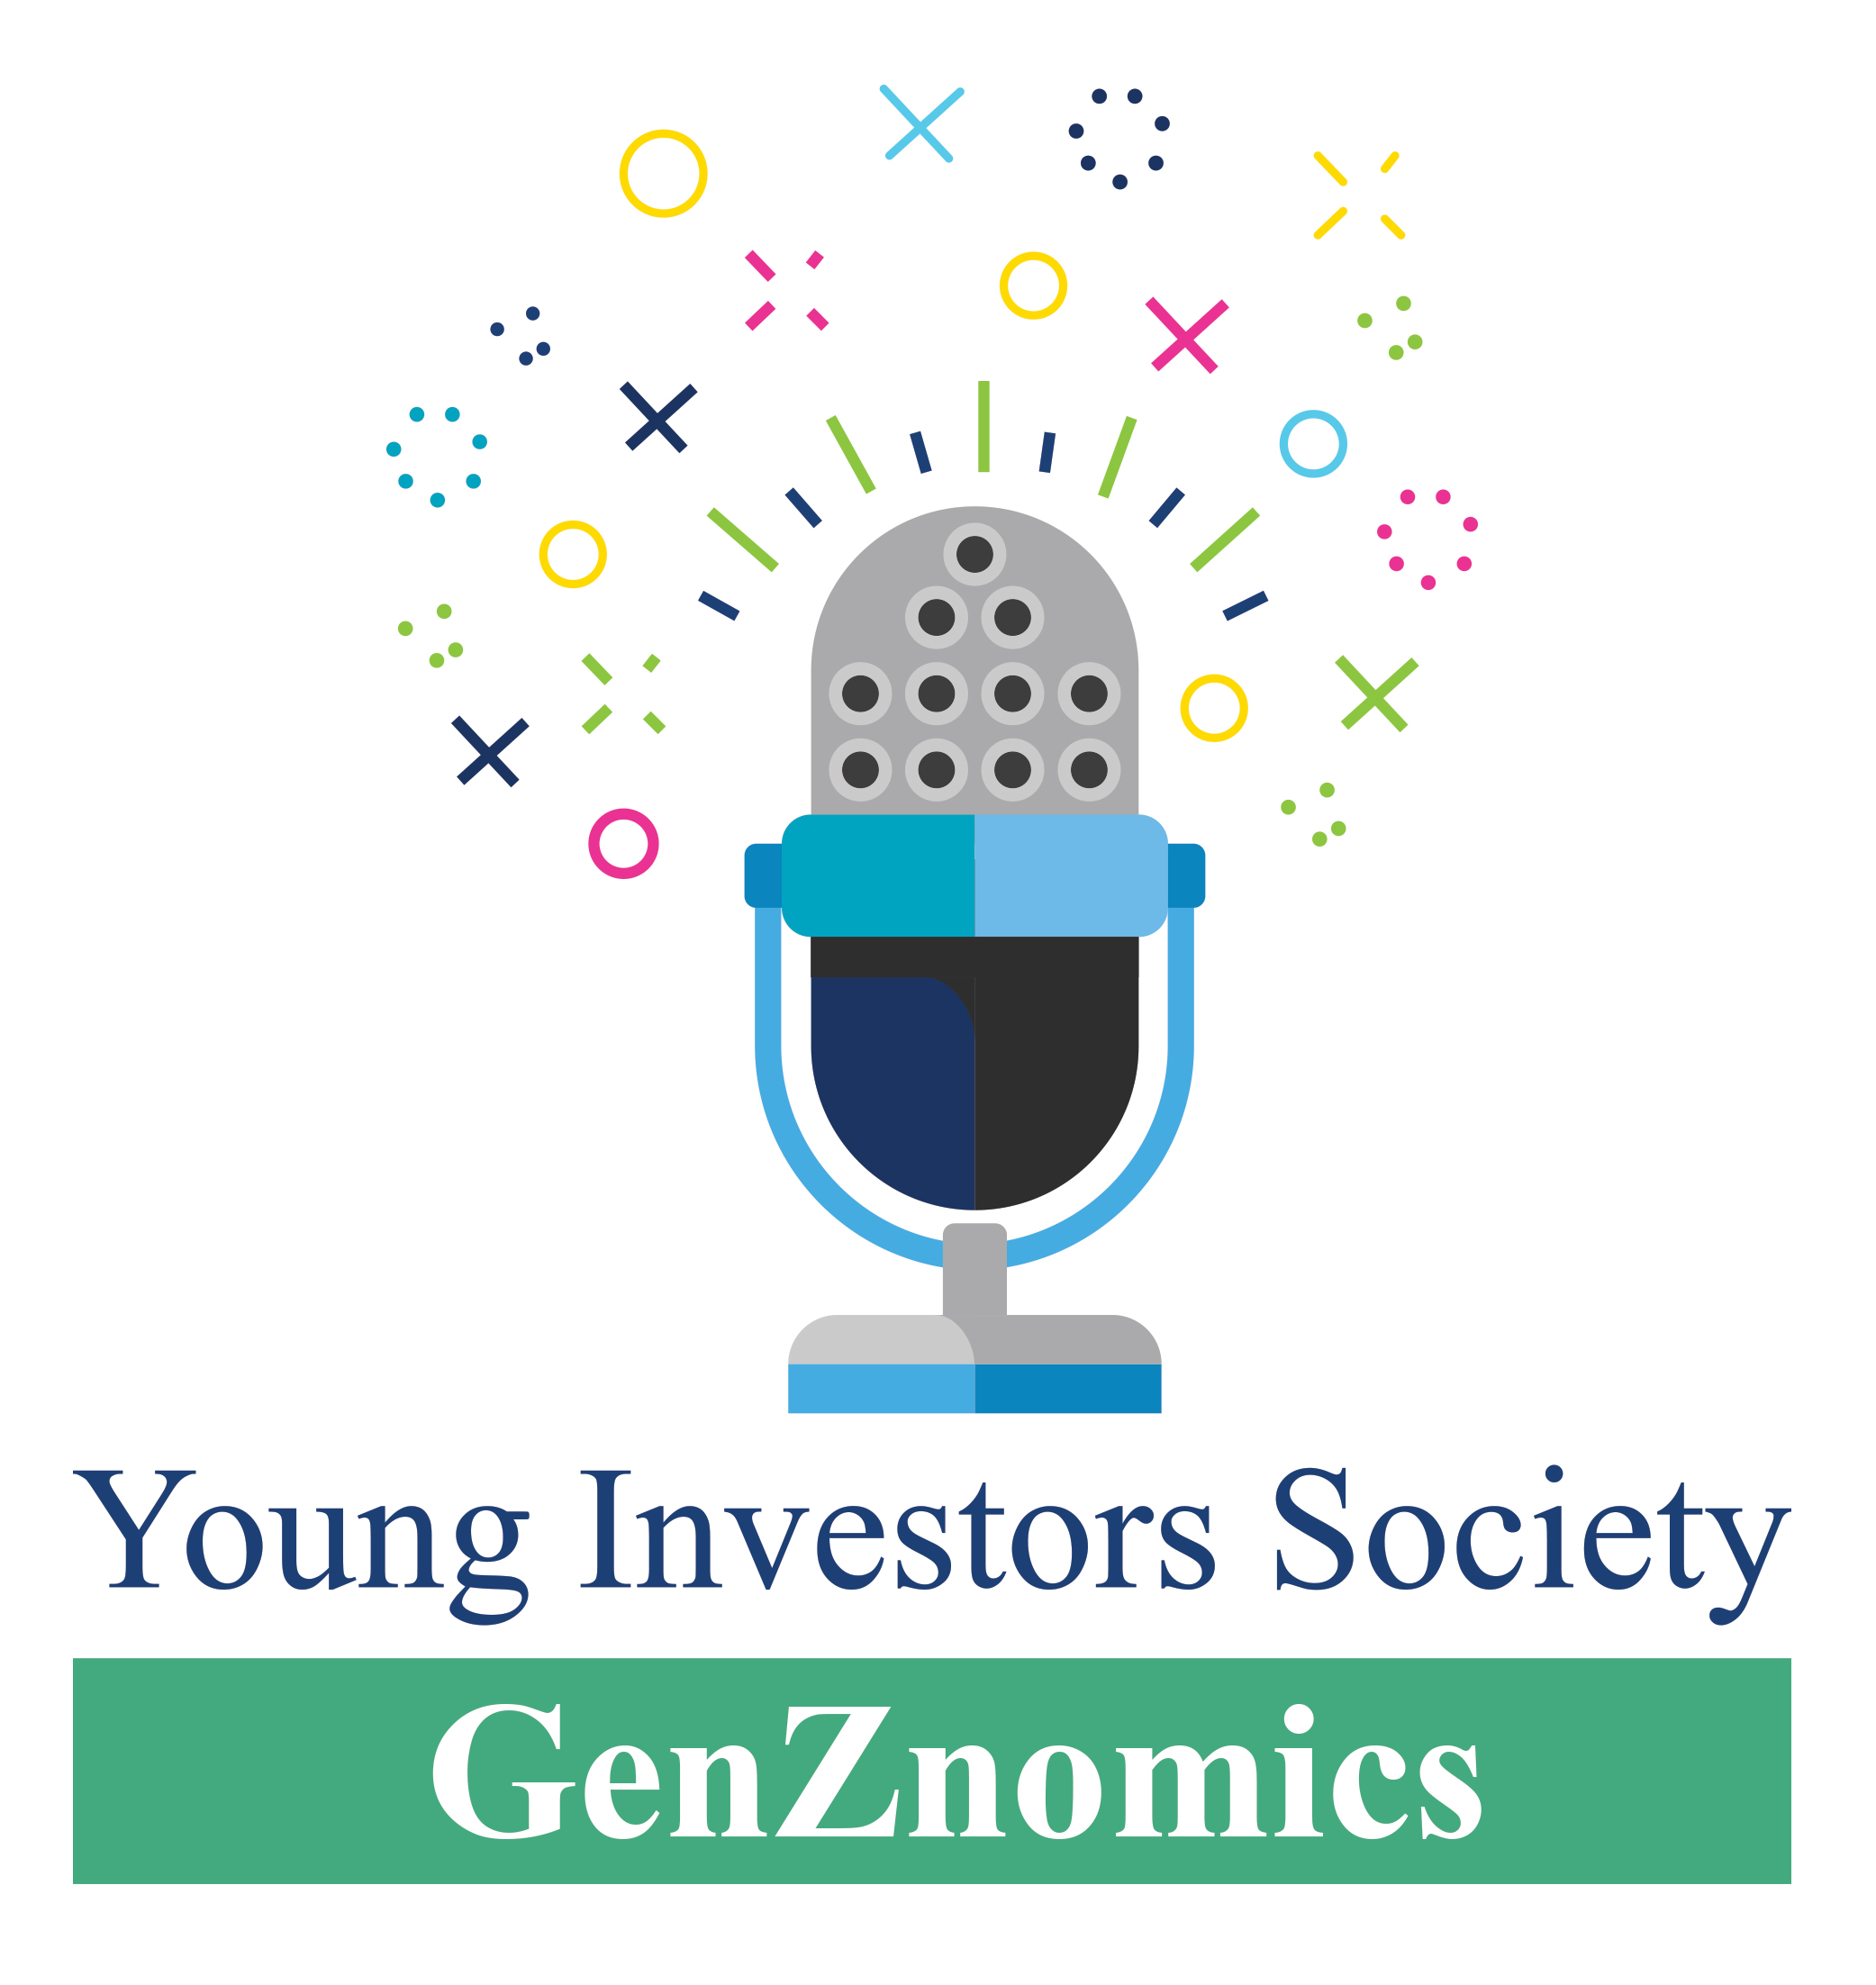 Check out the YIS Podcast: GenZnomics!